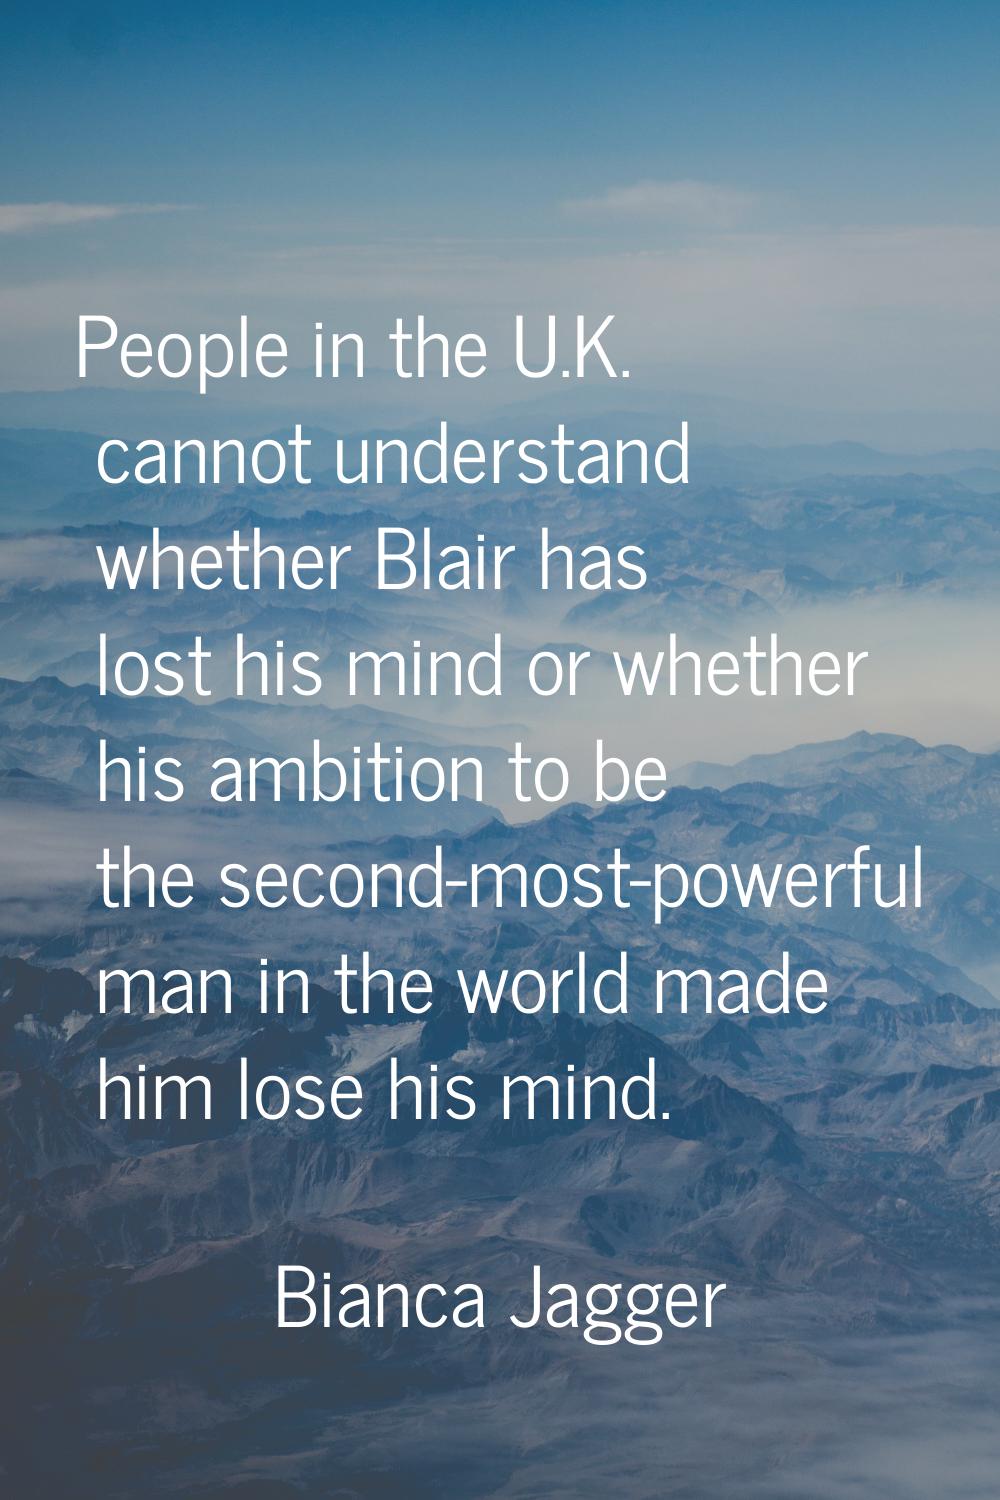 People in the U.K. cannot understand whether Blair has lost his mind or whether his ambition to be 